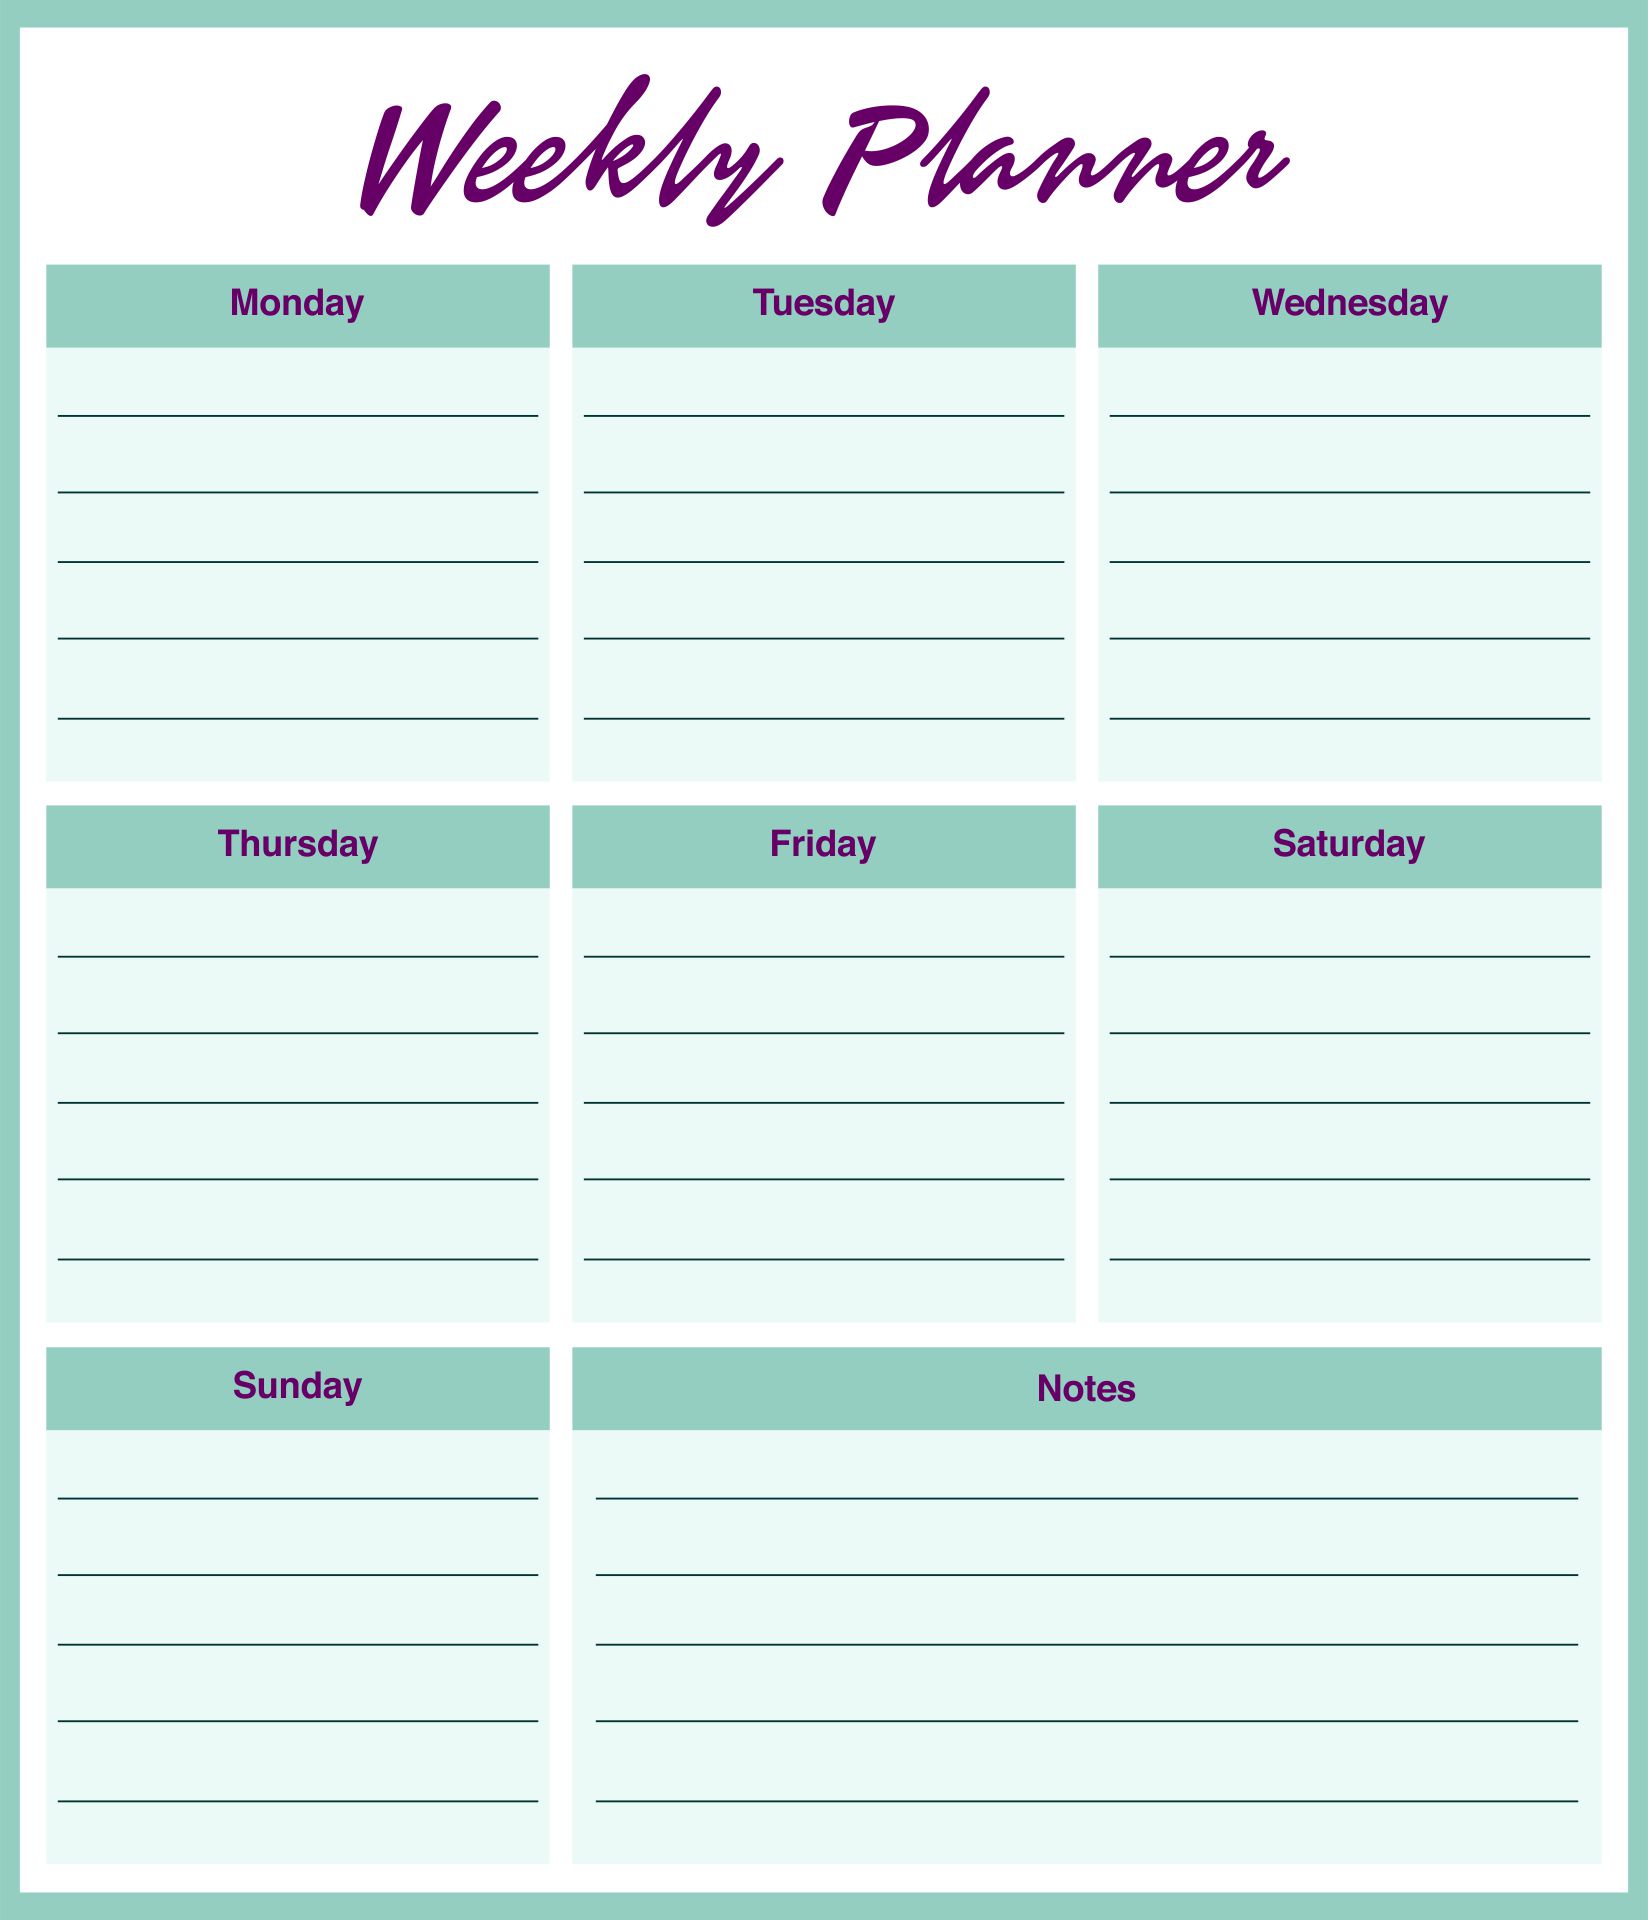 calendars-planners-paper-party-supplies-weekly-planner-printable